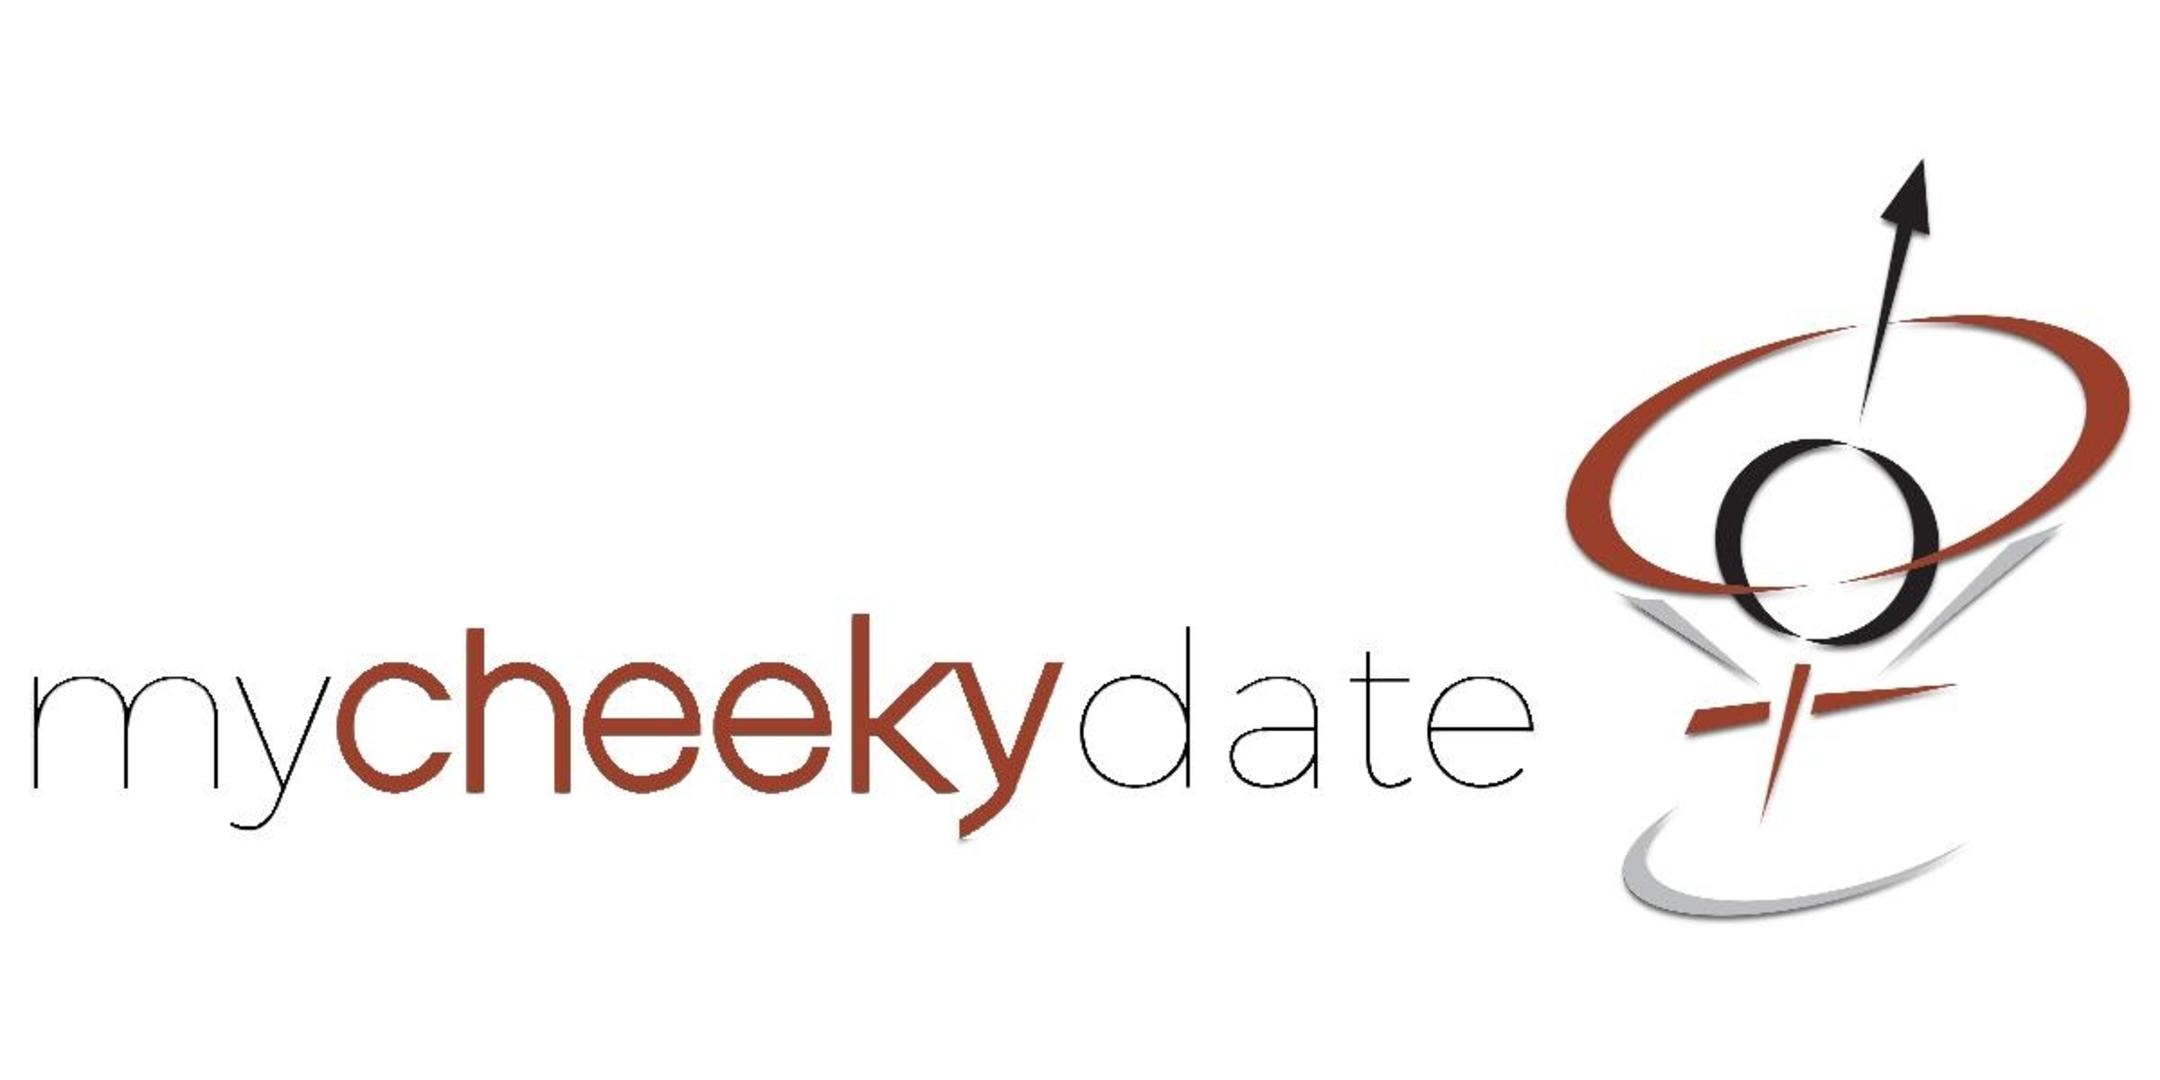 Speed Dating in Denver | Singles Event | Let's Get Cheeky!